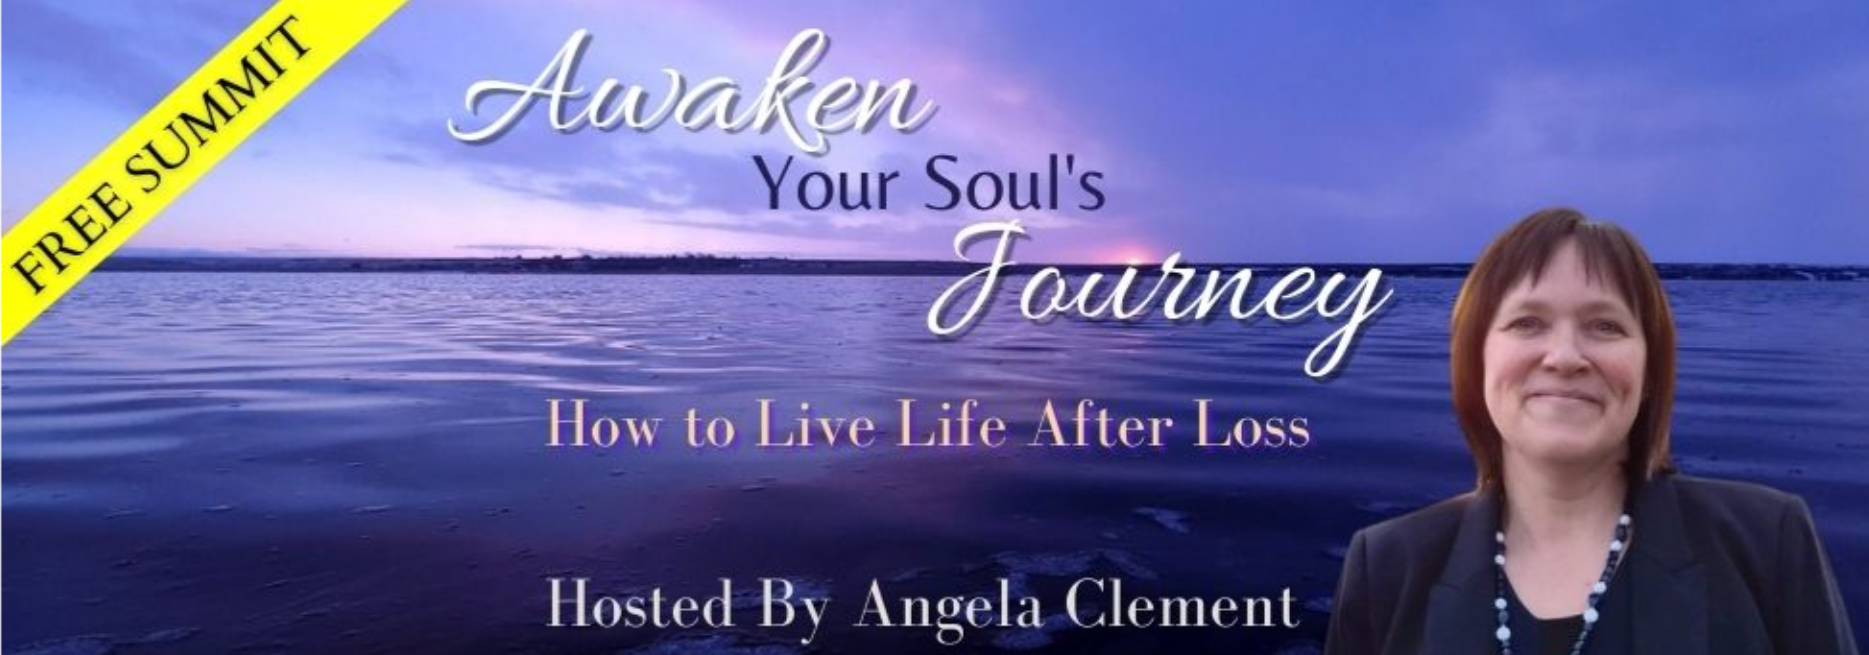 Awaken Your Soul's Journey: How to Live Life After Loss 